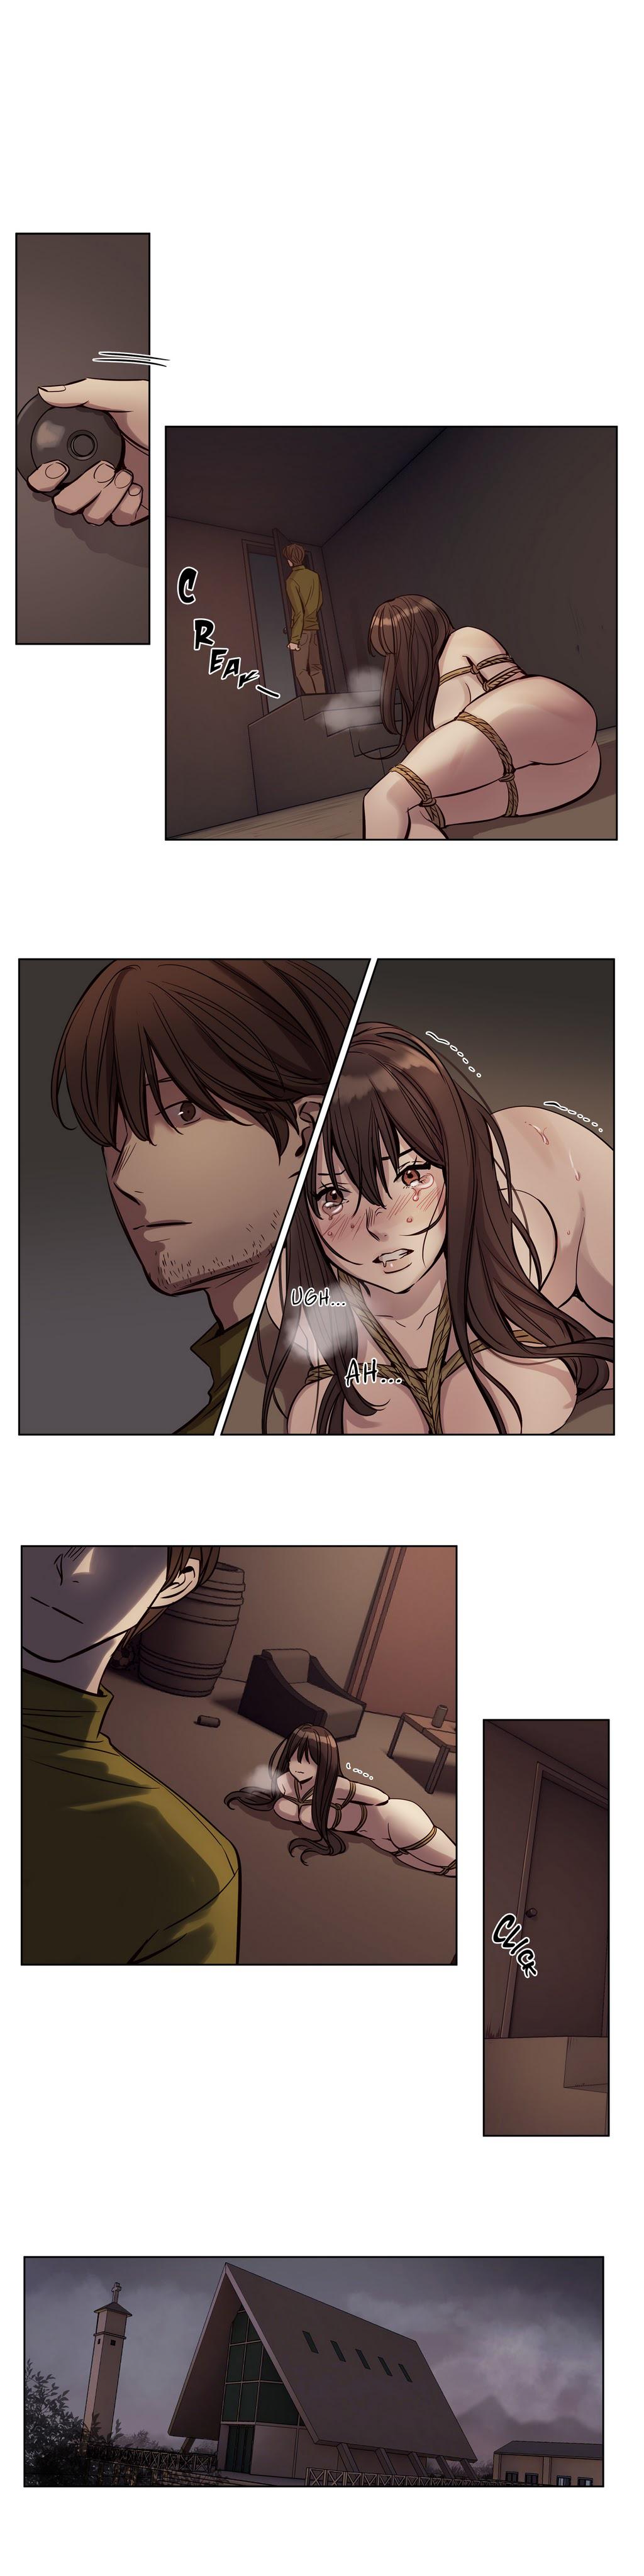 Gayfuck Atonement Camp Ch.19-20 Live - Page 2